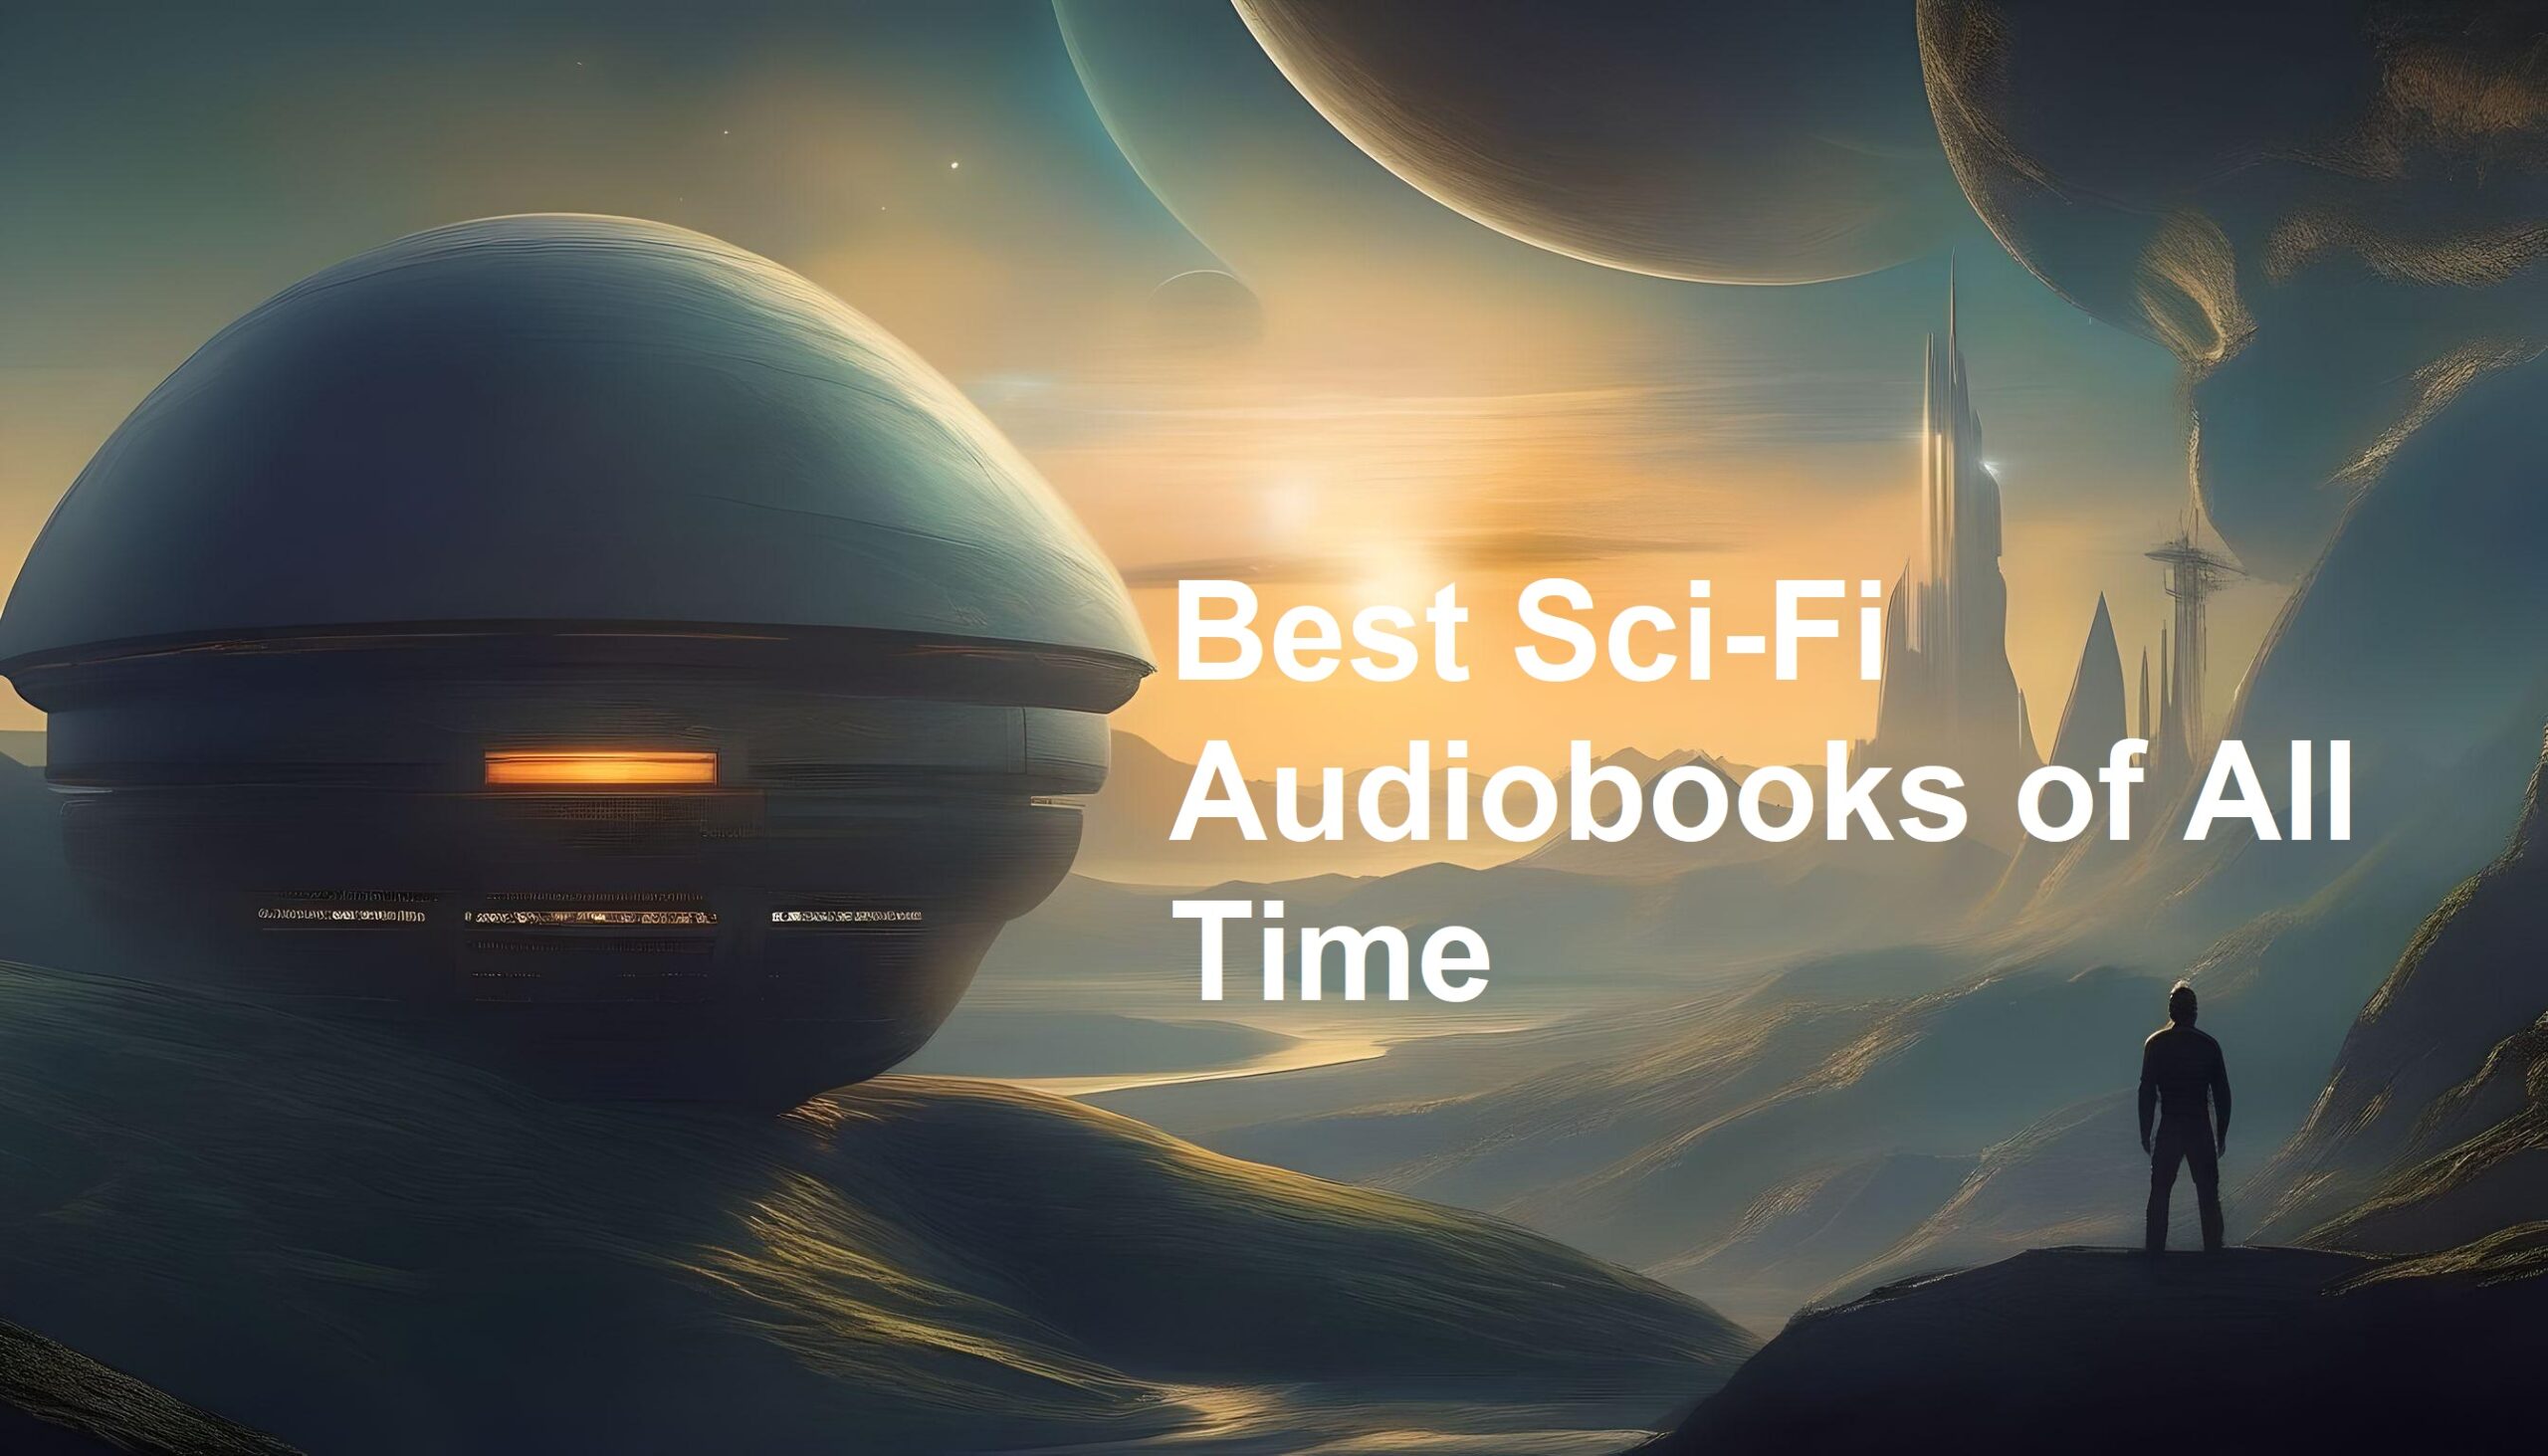 Best Sci-Fi Audiobooks of All Time